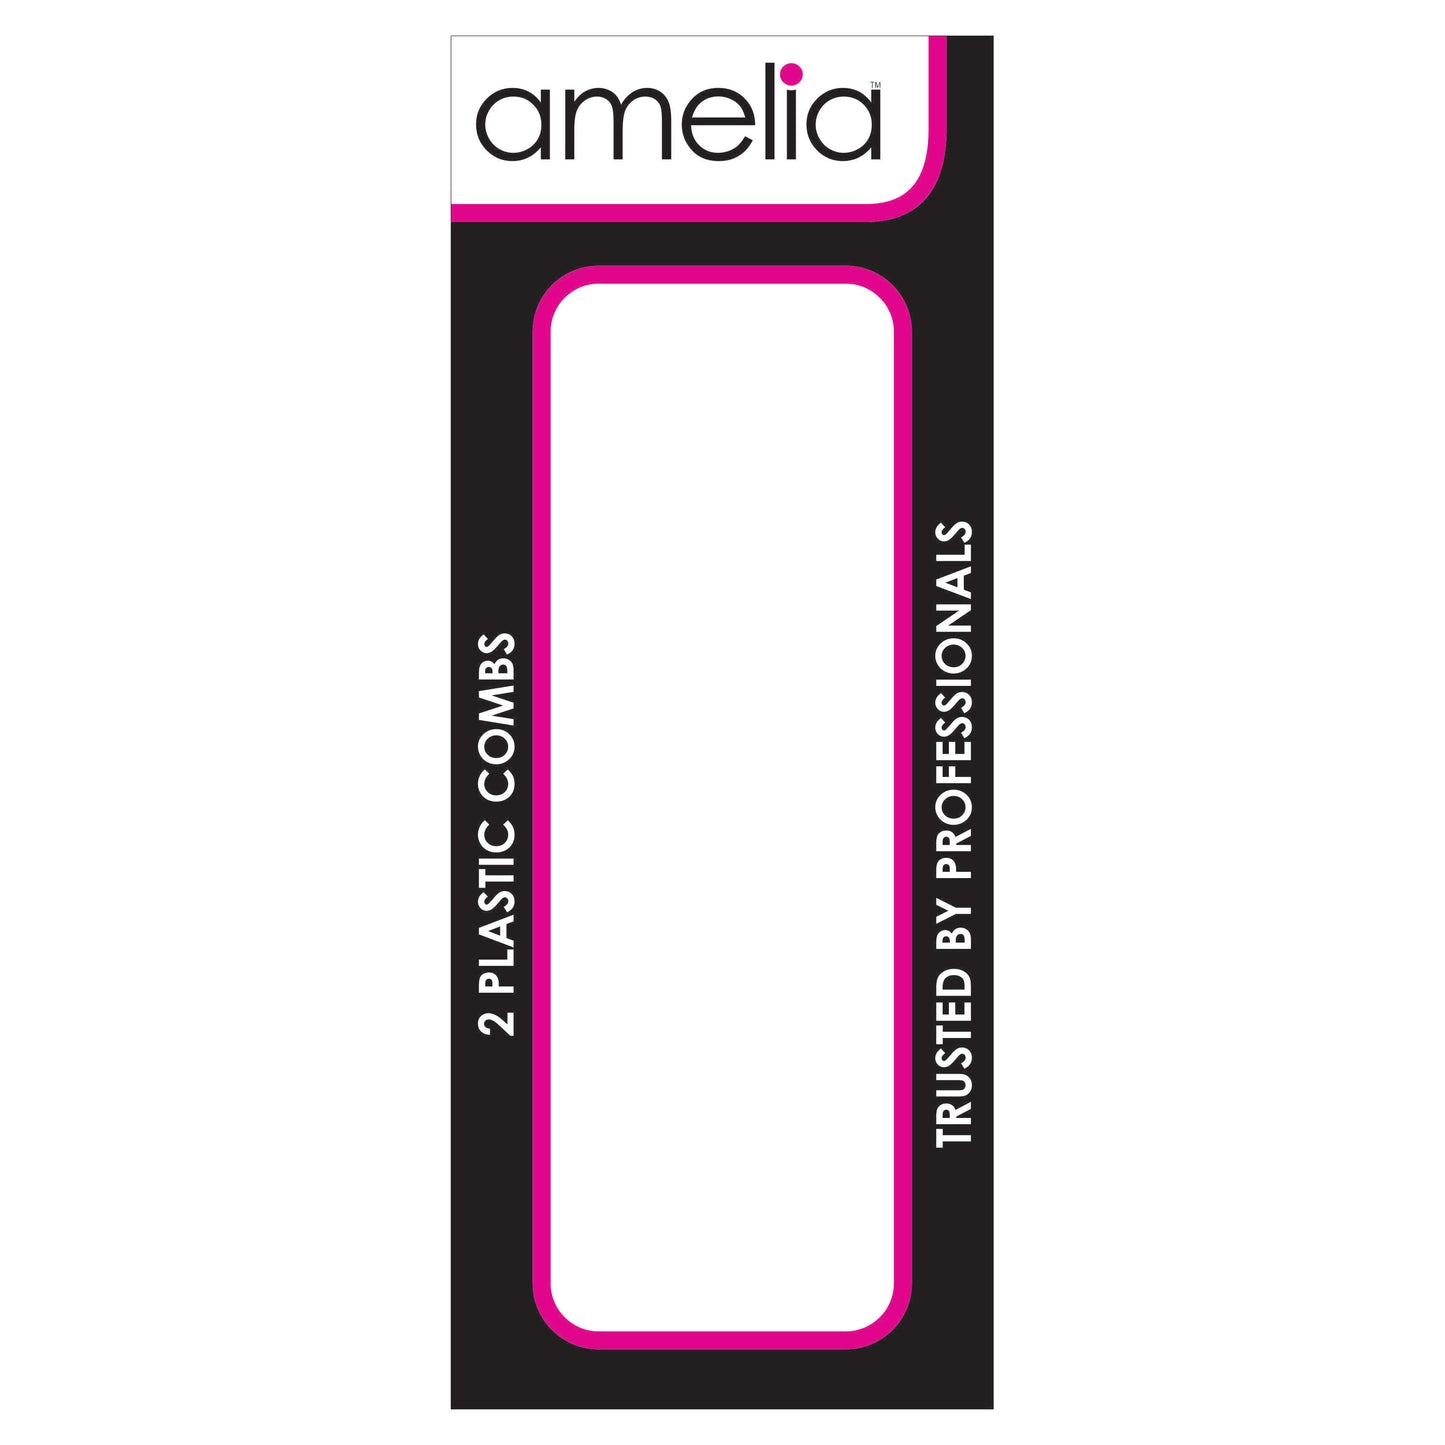 Amelia Beauty, 8.5in Black Plastic Pin Rat Tail Tease Comb, Made in USA, Professional Grade Hair Comb, Highlighting, Sectioning, Styling, Teasing Hair with Long Tail Tip, Wet or Dry, 8.5"x1", 2 Pack